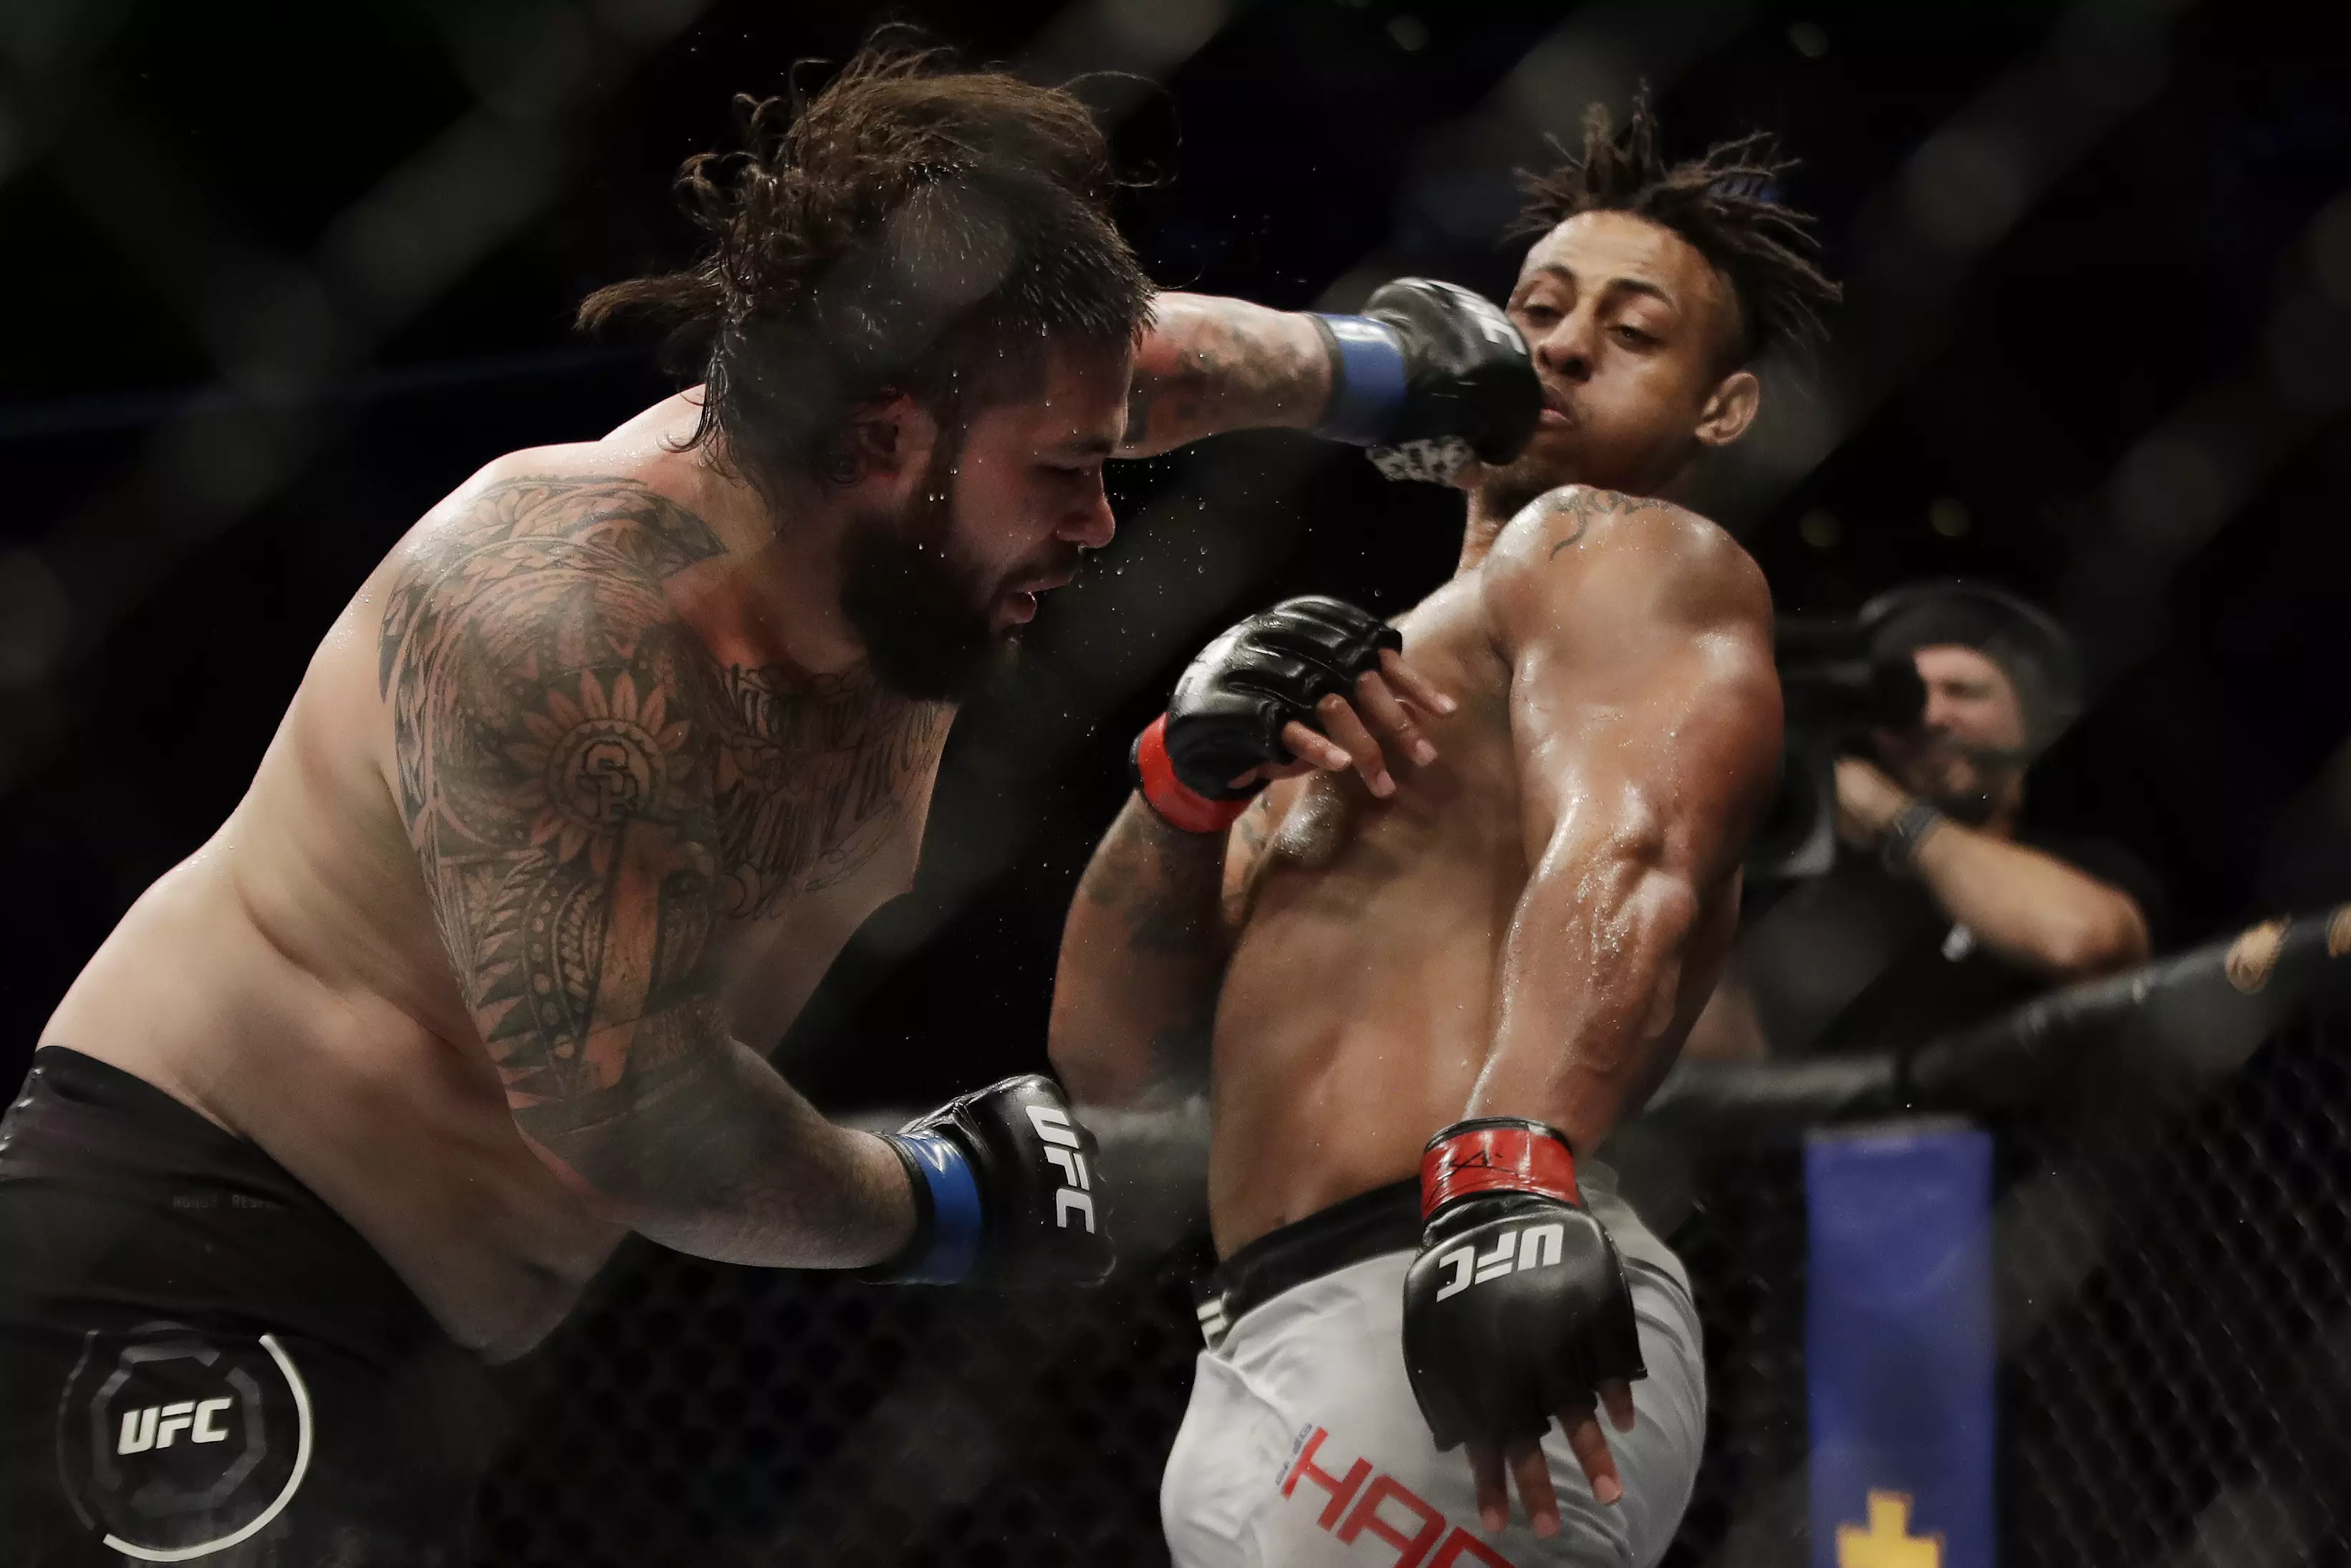 Former NFL defensive end Greg Hardy looked to have won his third straight UFC bout before it was deemed a no contest